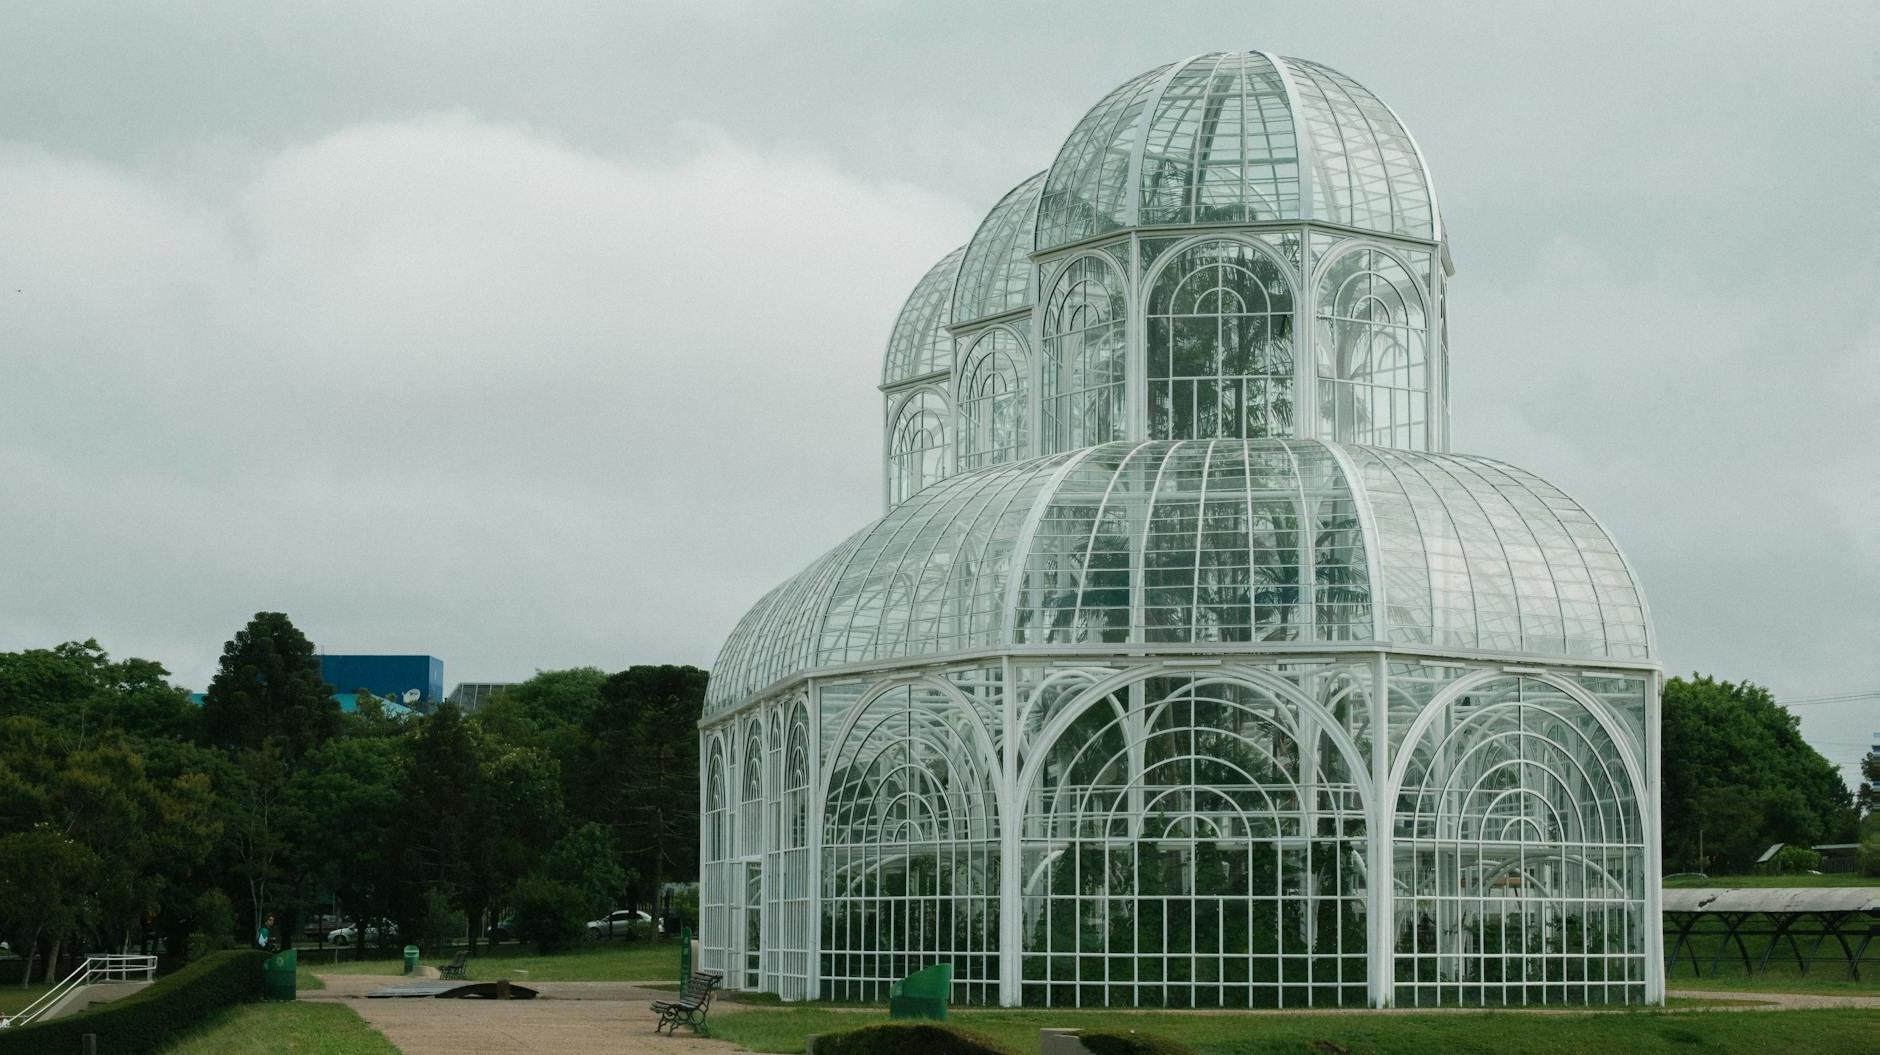 Wide Angle Shot Of White Greenhouse In The Middle of A Park